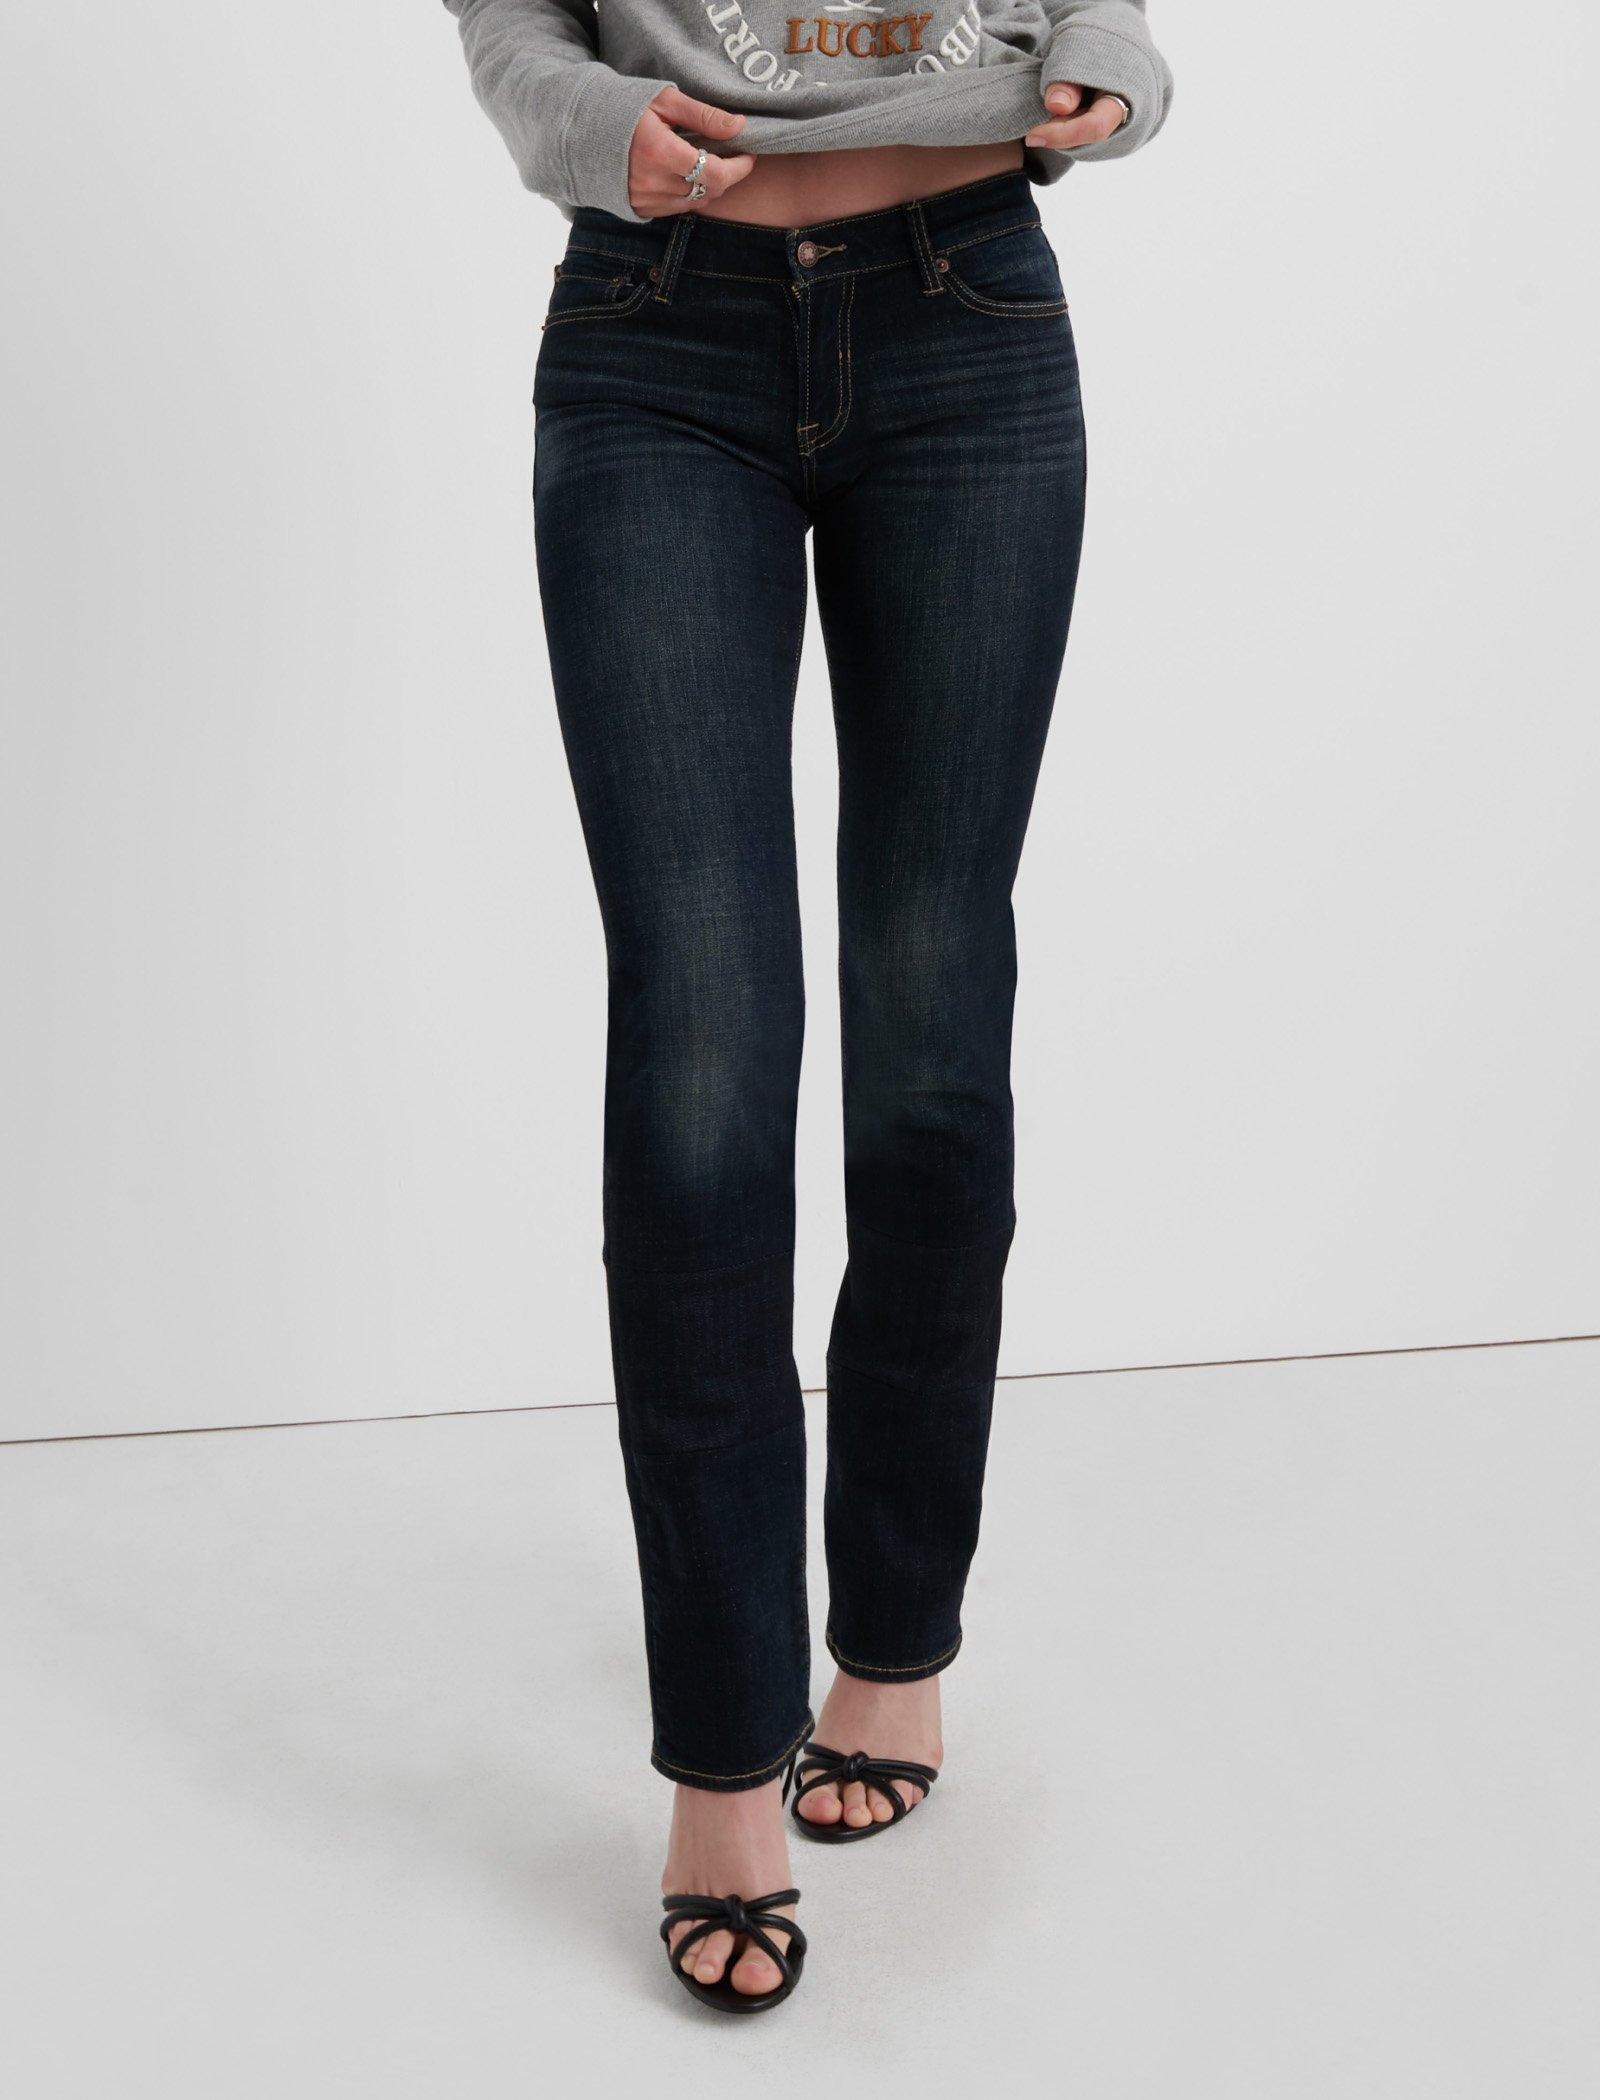 lucky brand sweet and straight black jeans